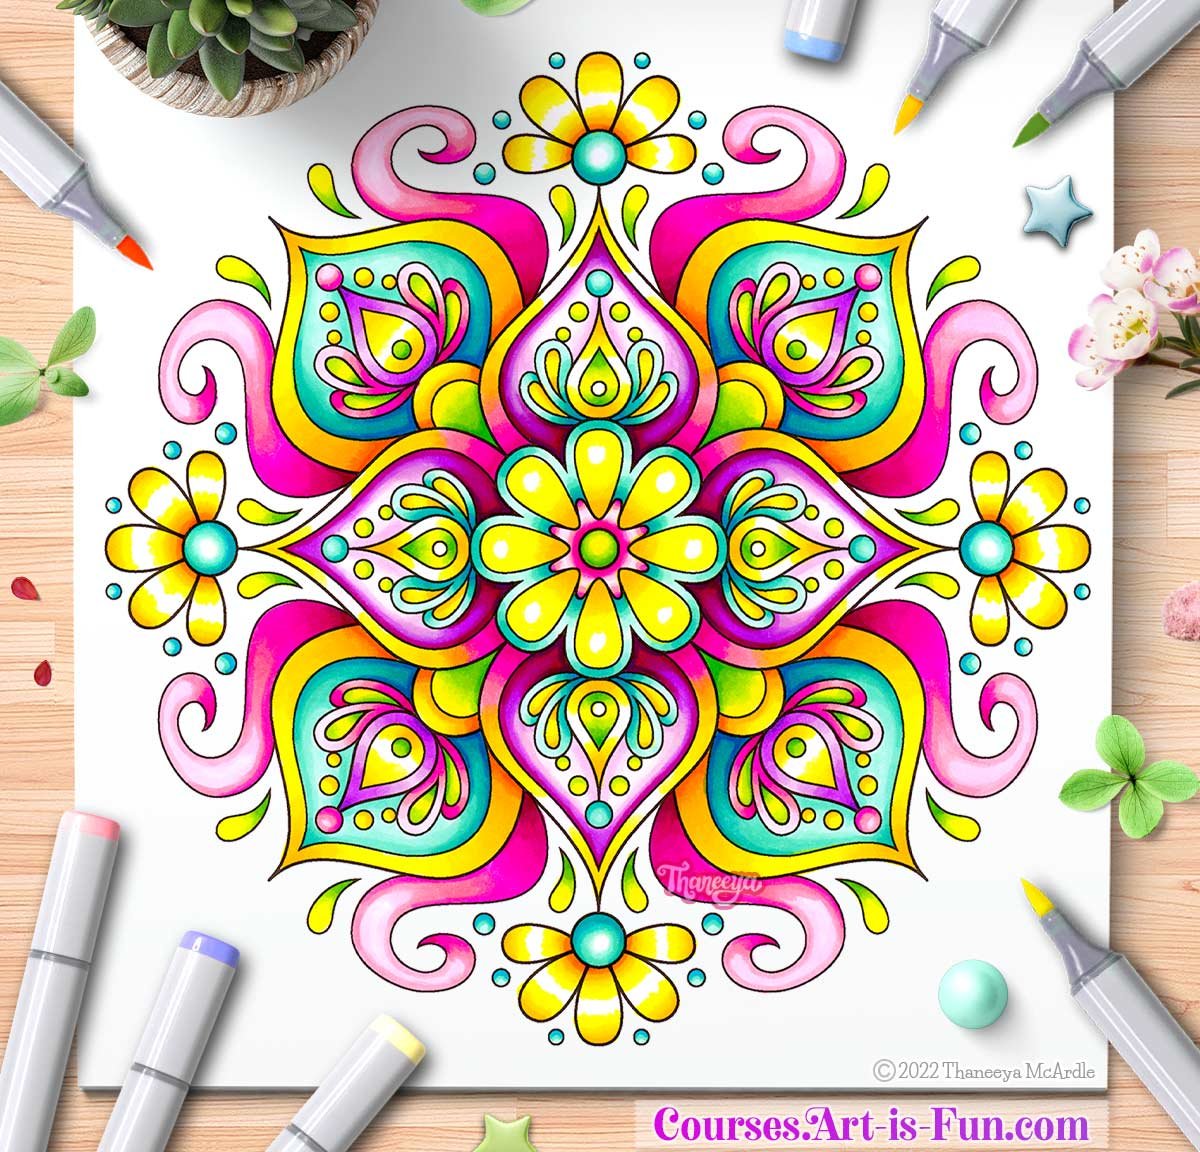 Tips for Using Alcohol Markers in Coloring Books - How to Avoid